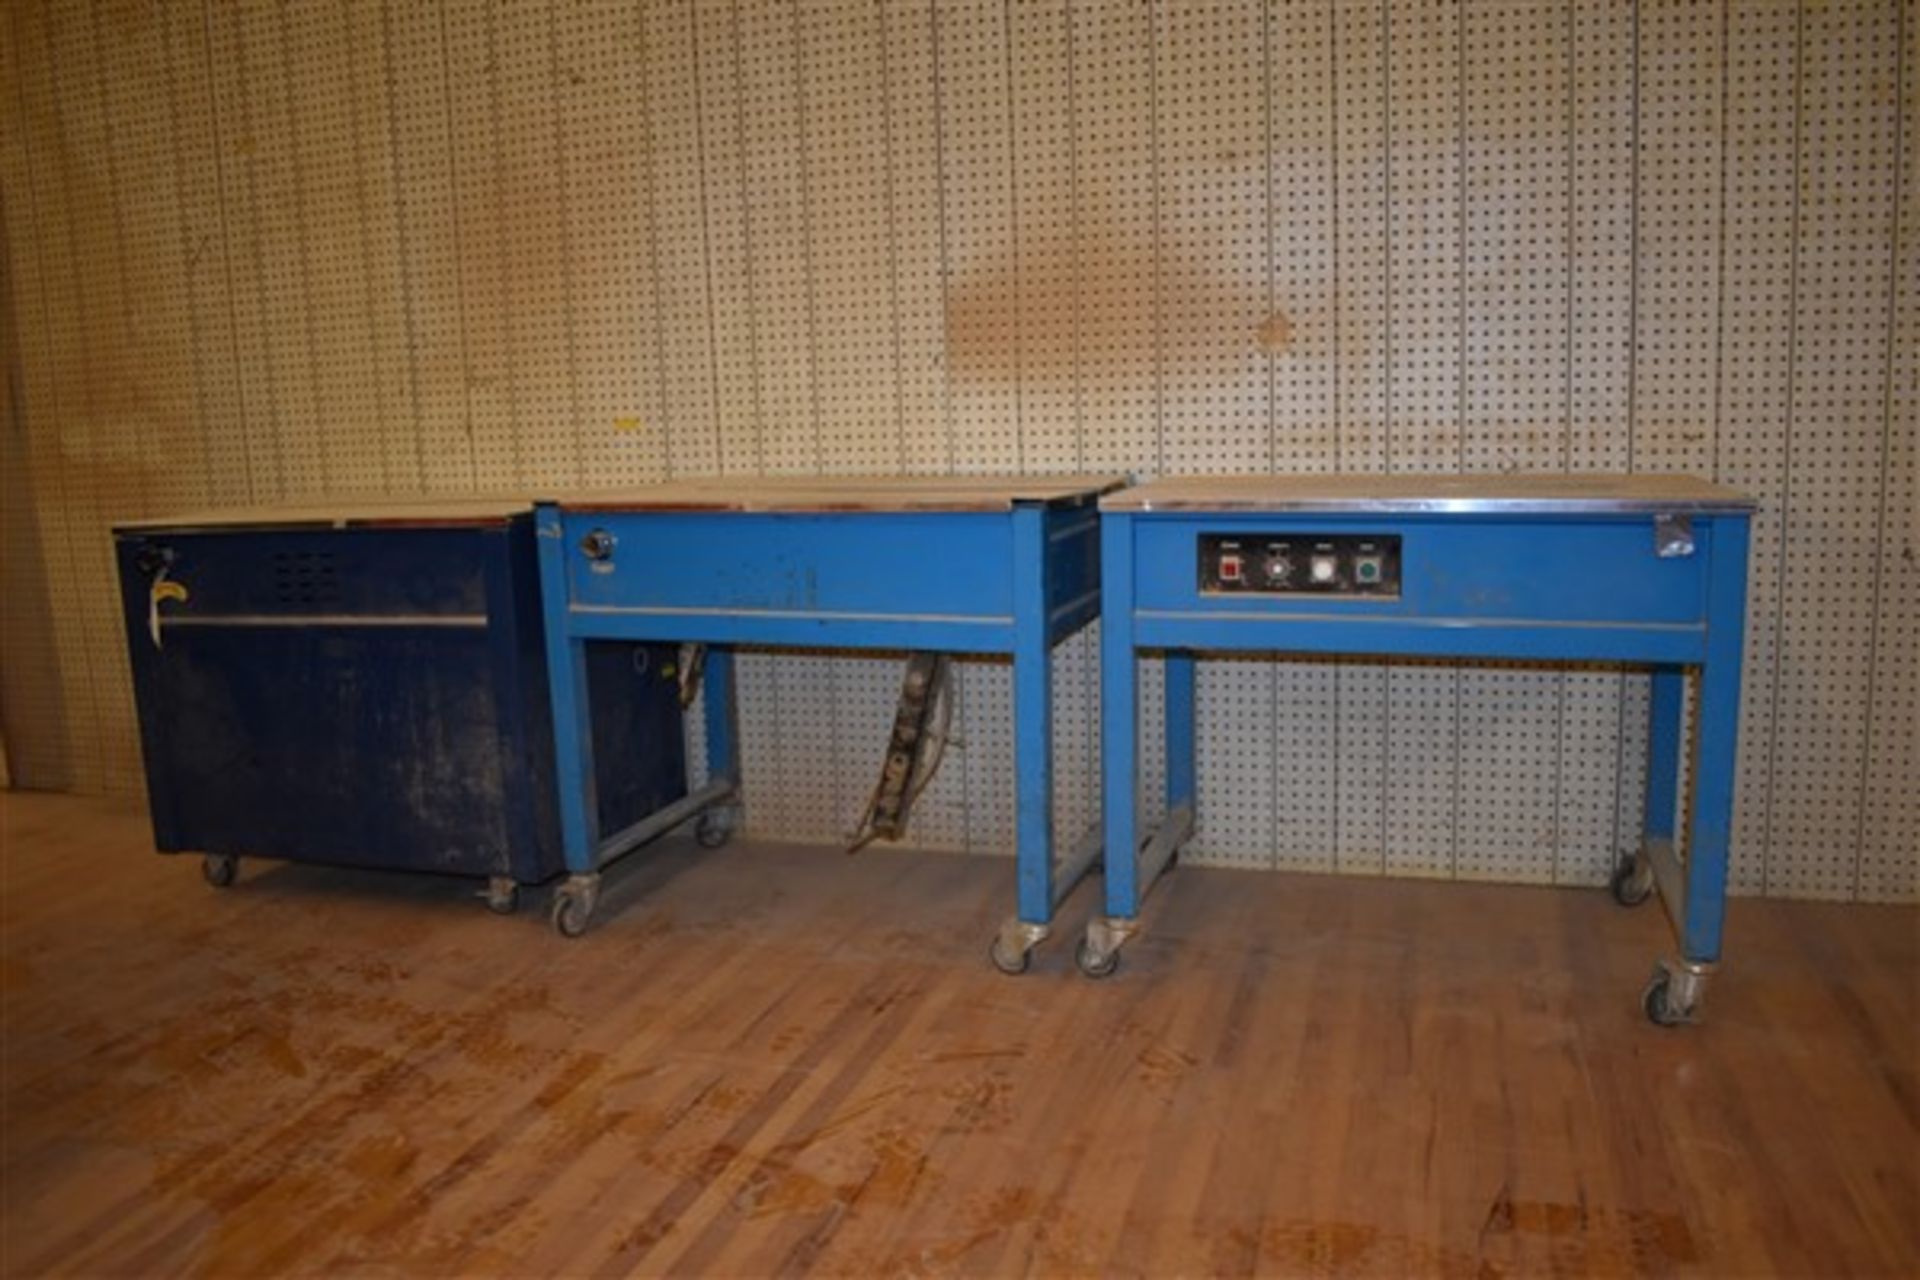 Strapping Machines for Parts - 3 Machines - Image 2 of 2